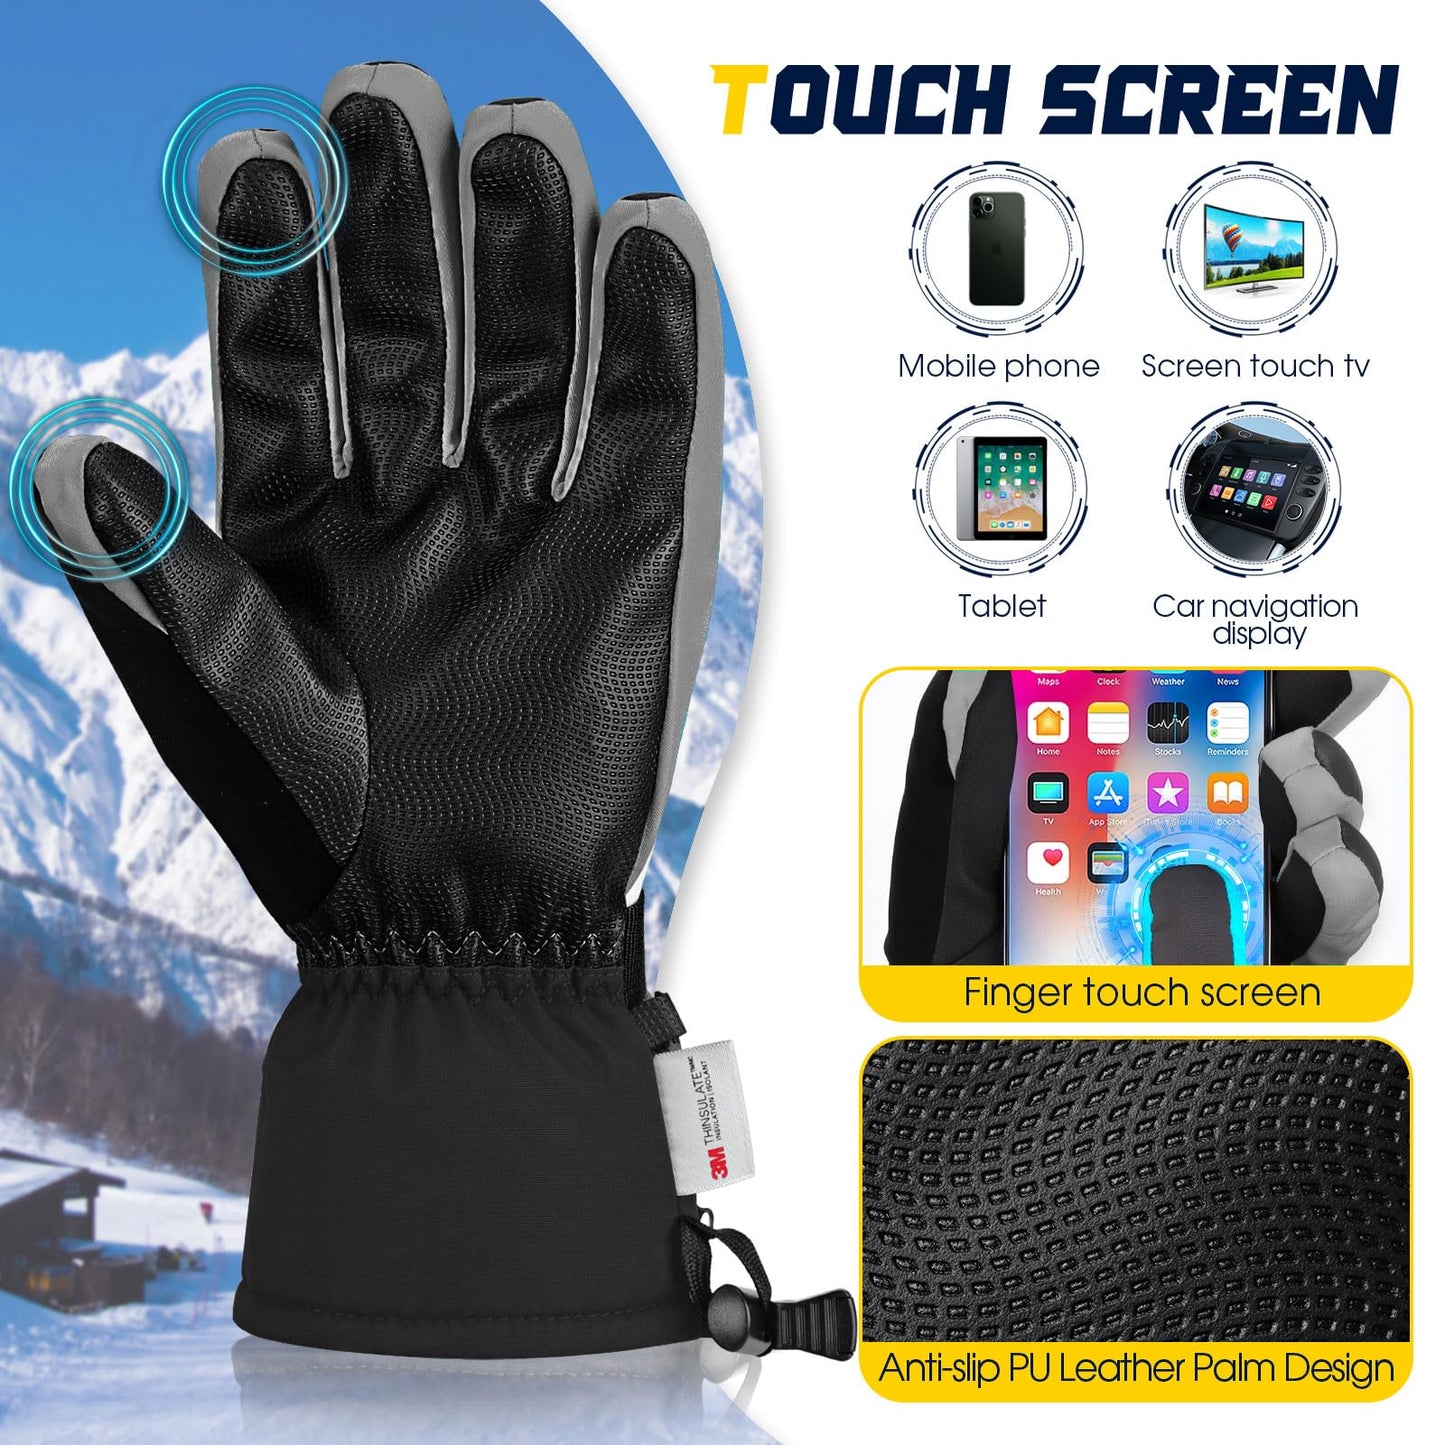 MORXPLOR Ski Snow Gloves for Men Women,3M Thinsulate Insulated Warm Winter Snowboard Gloves,Waterproof Windproof Winter Touchscreen Snowmobile Gloves for Cold Weather